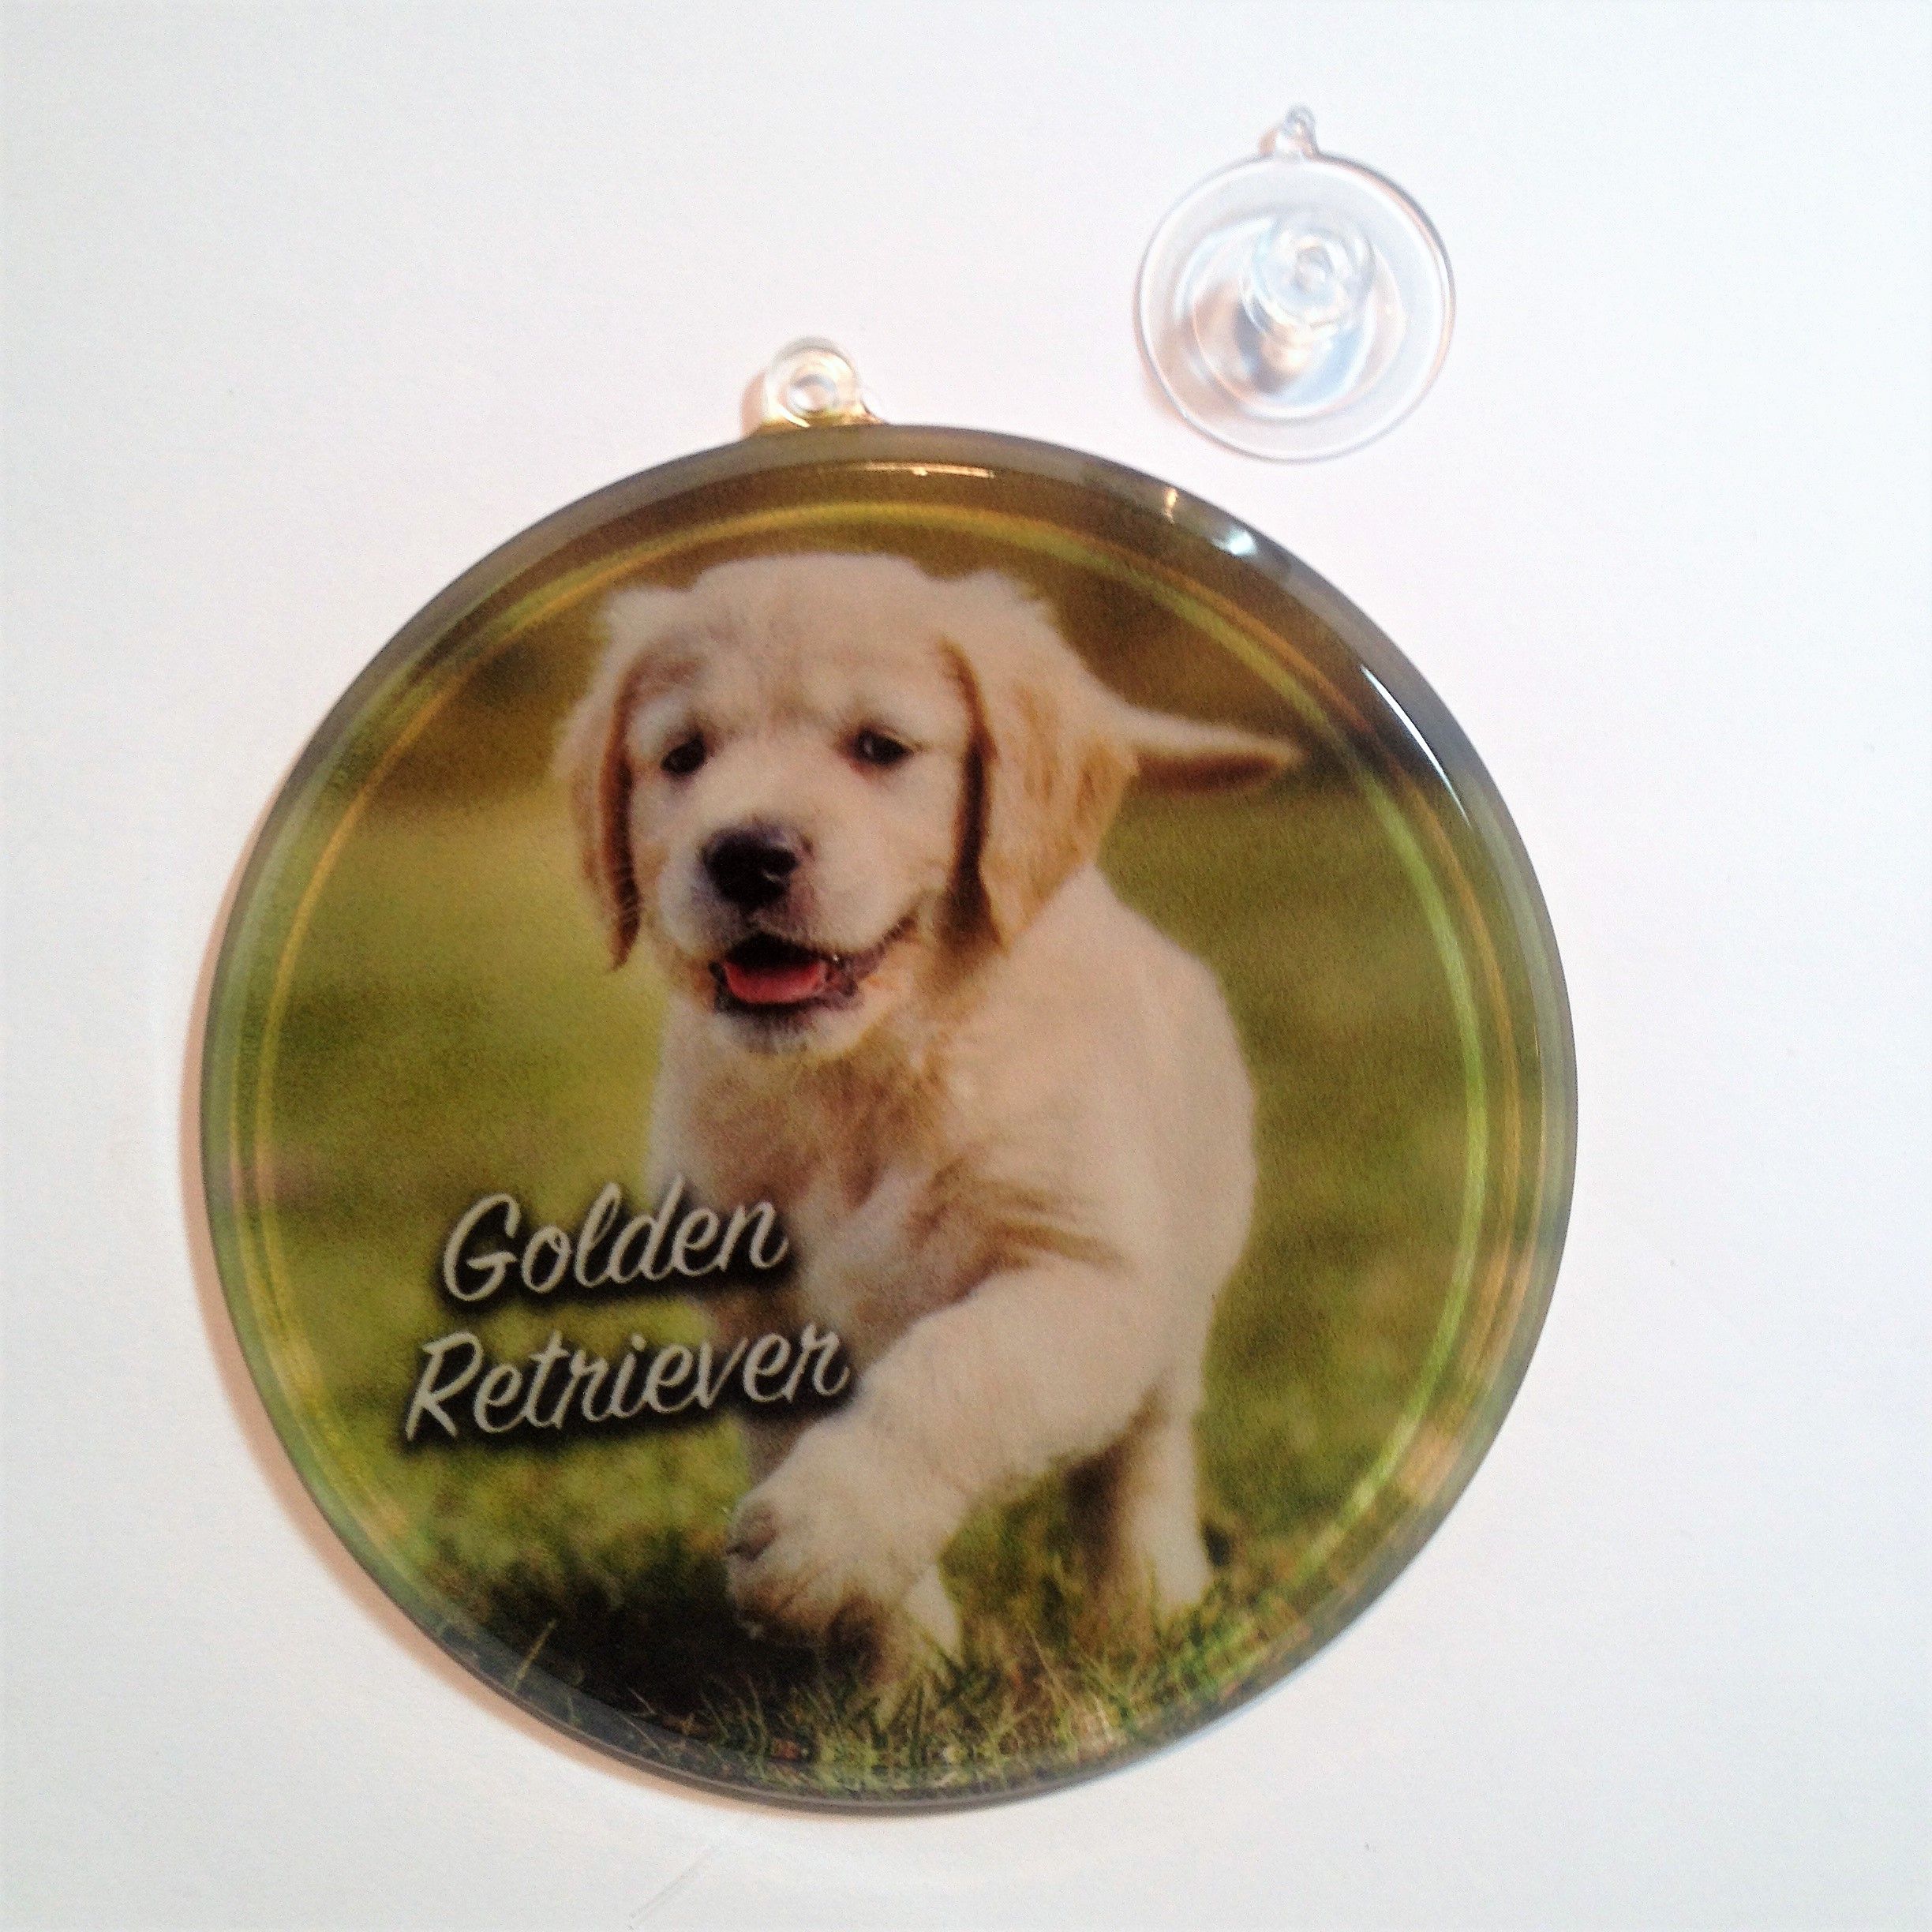 A golden retriever puppy is prancing on the glass on this ...